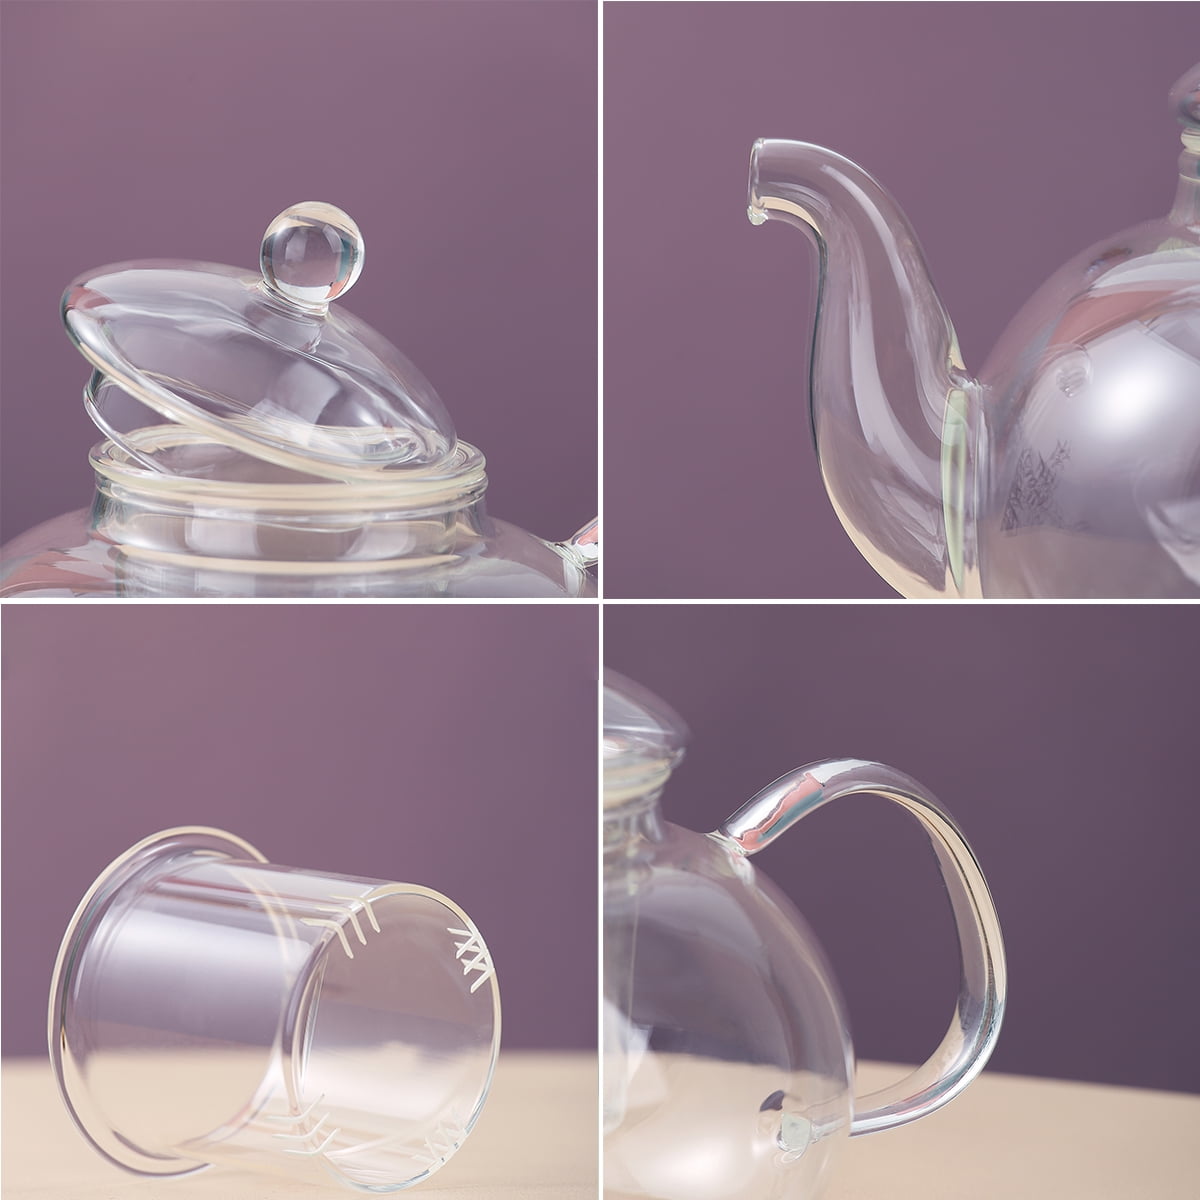 XIXIDIAN Clear Glass Tea Kettle,Glass Teapot Kettle with Stainless Steel  Removable Infuser for Blooming Tea & Loose Leaf Tea 1000ML